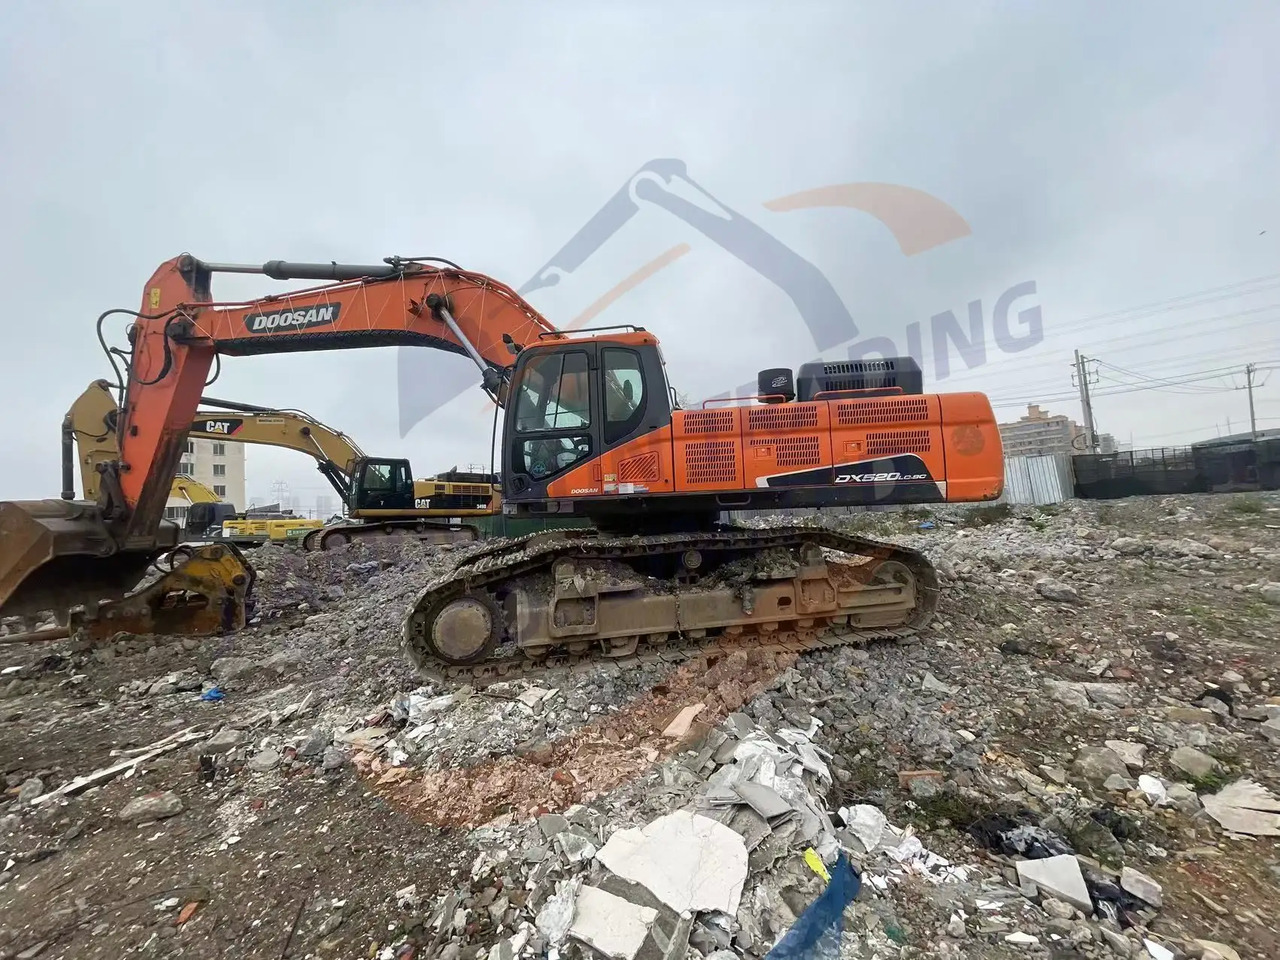 Pelle sur chenille Low running hours Used Doosan excavator DX520LC-9C in good condition for sale: photos 6